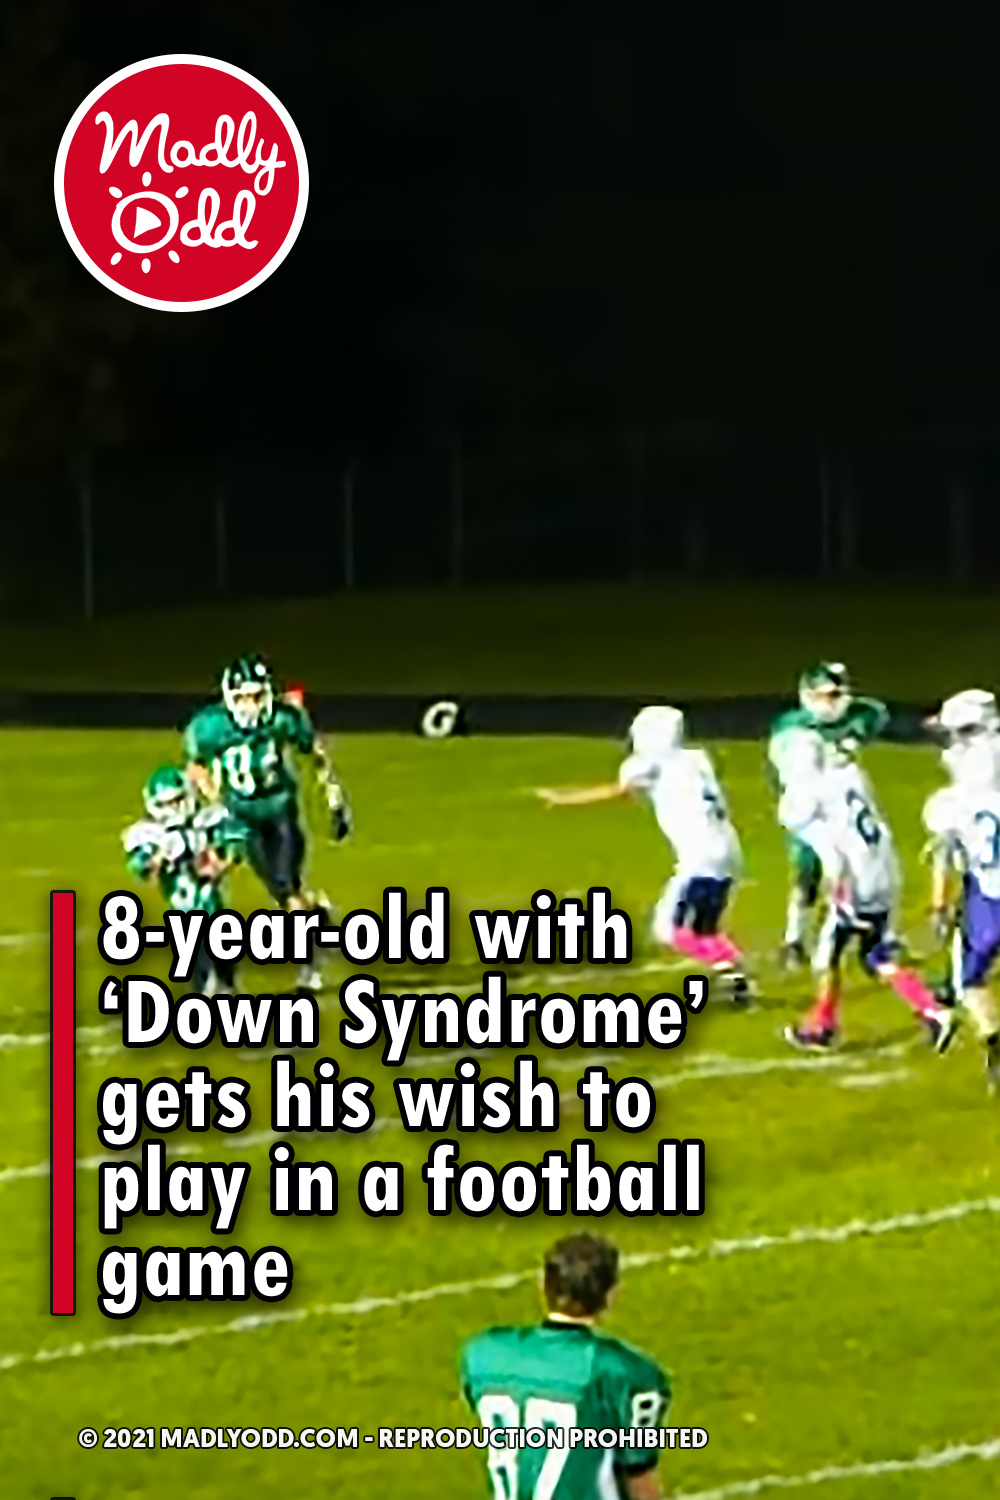 8-year-old with ‘Down Syndrome’ gets his wish to play in a football game